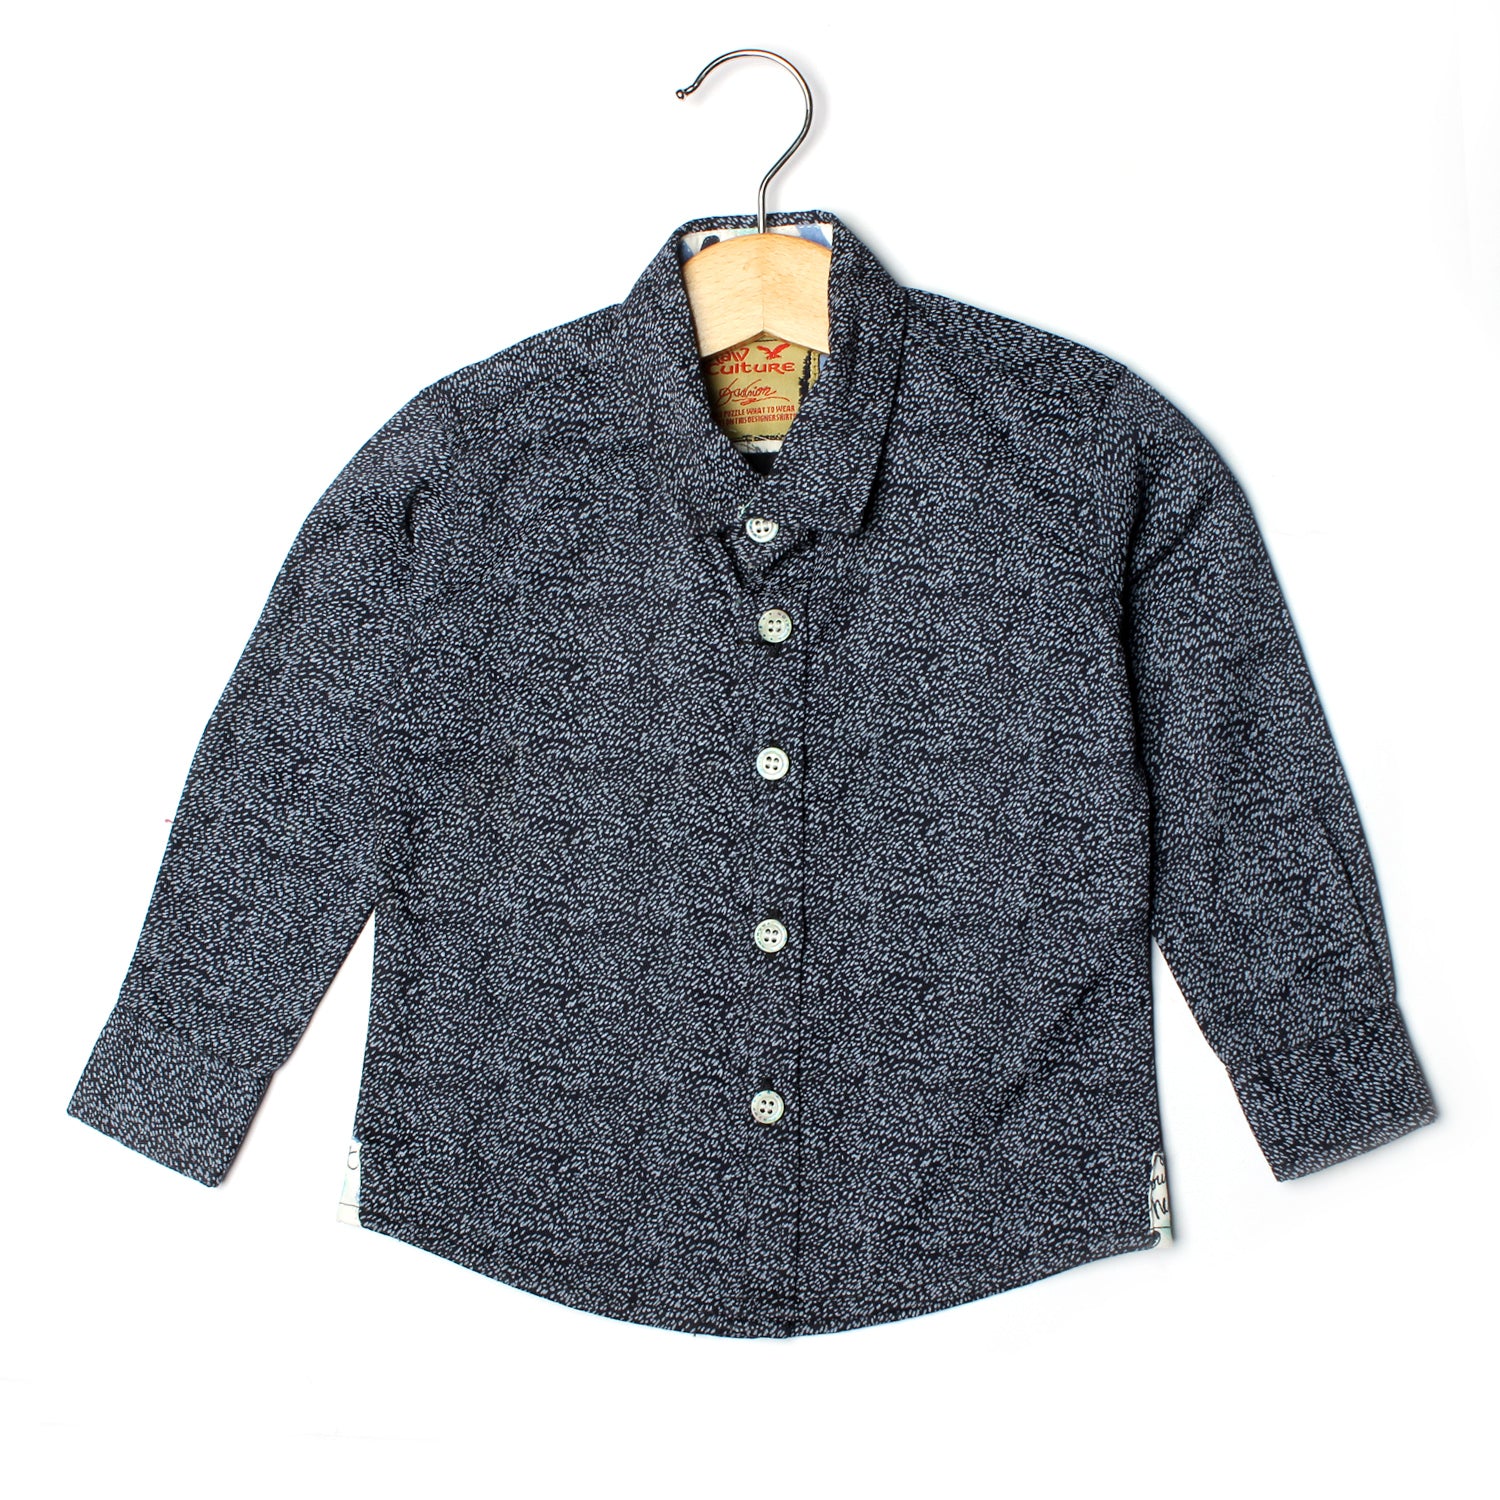 NAVY BLUE WITH WHITE SPOTS PRINTED CASUAL SHIRT FOR GIRLS